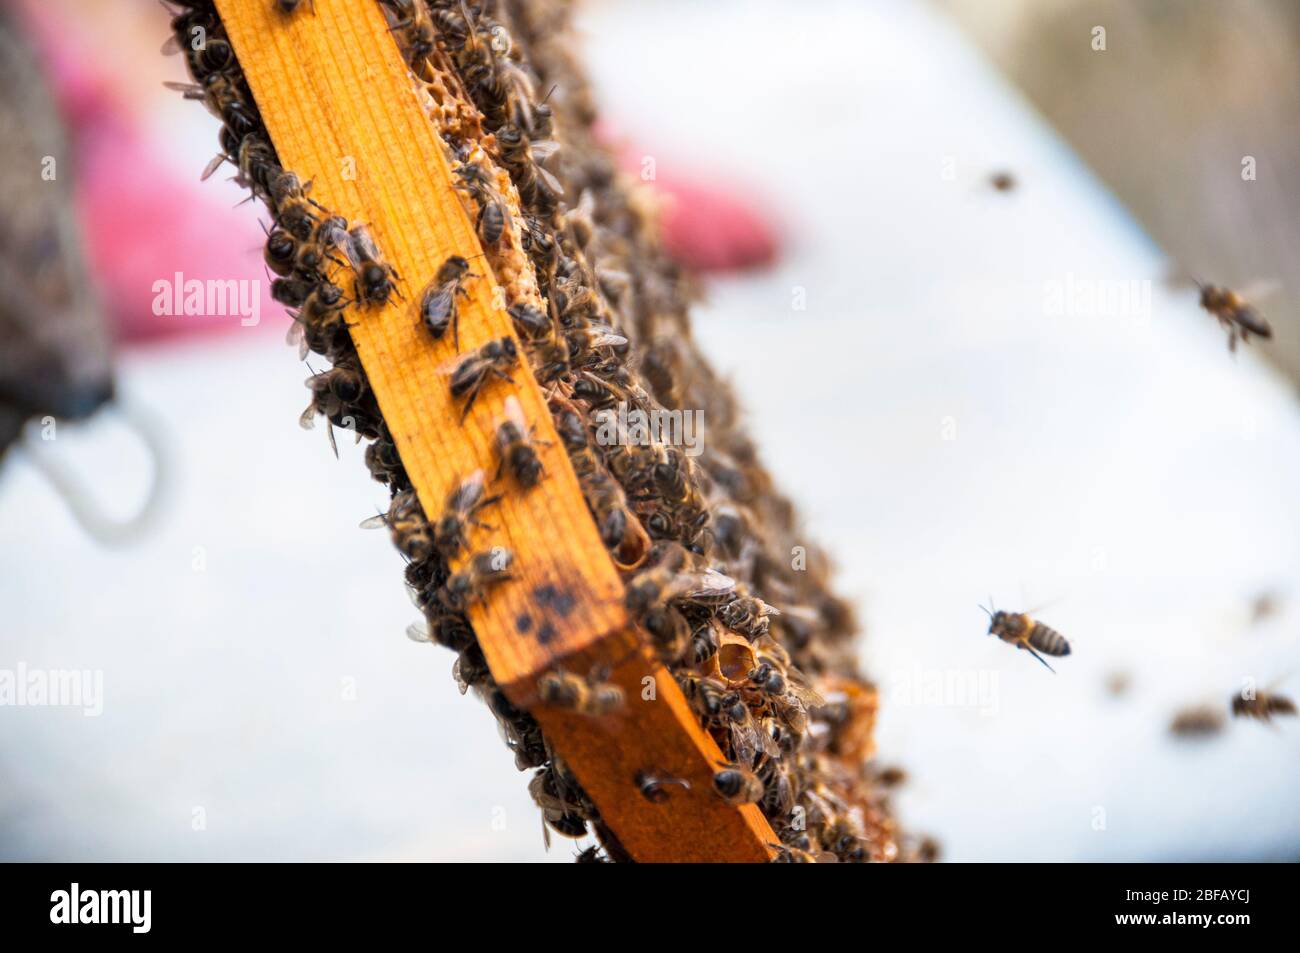 Collecting honey in Monegros, Aragon, Spain Stock Photo